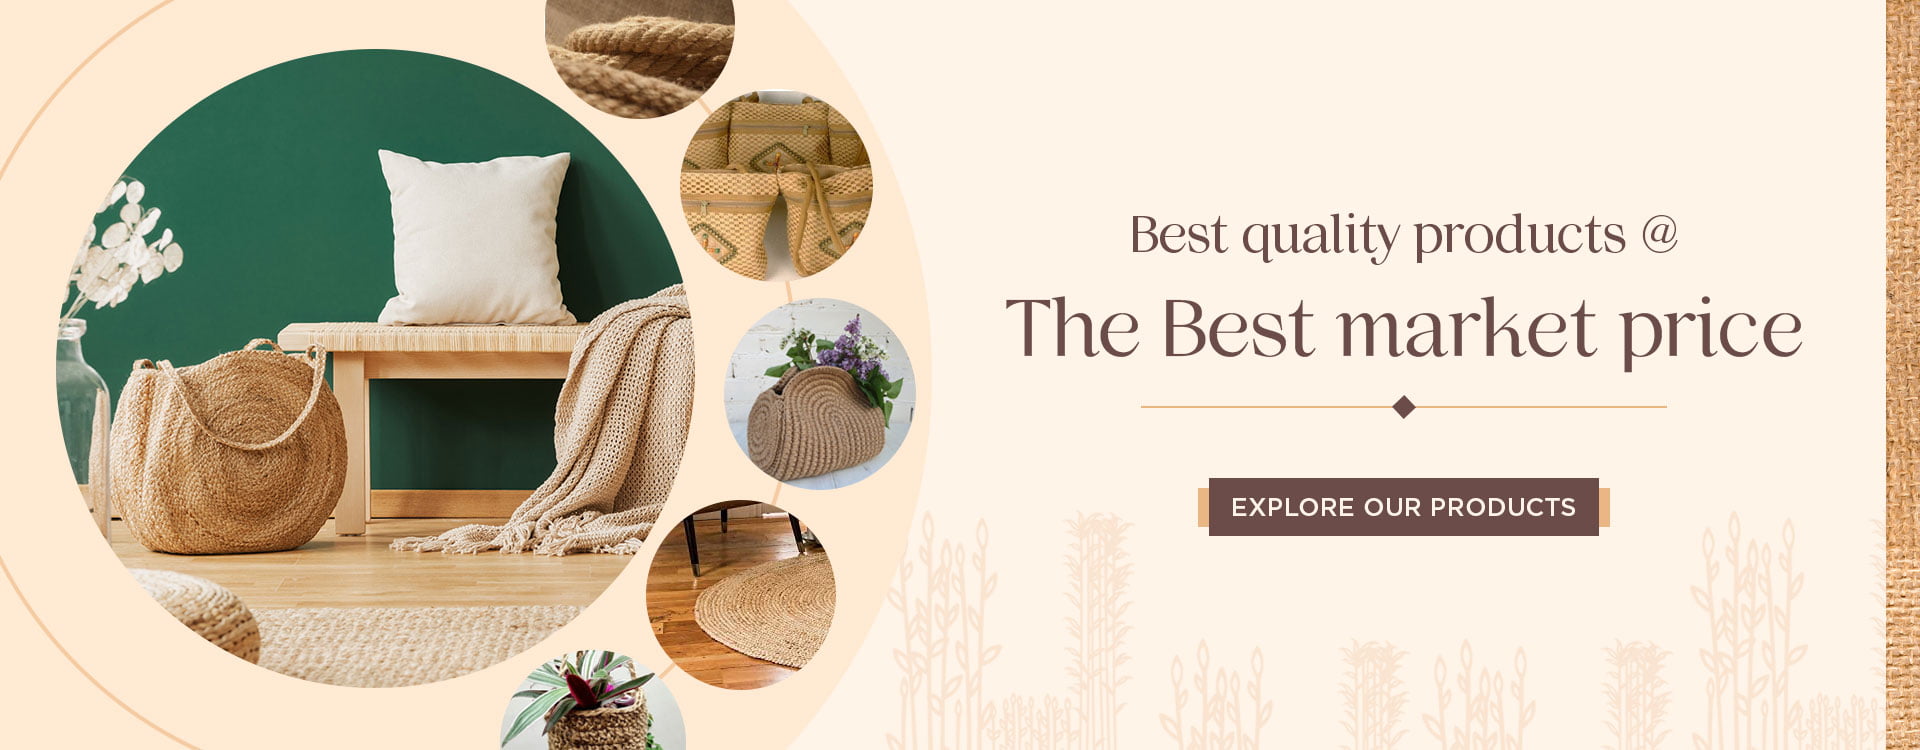 Best quality products at the best market price